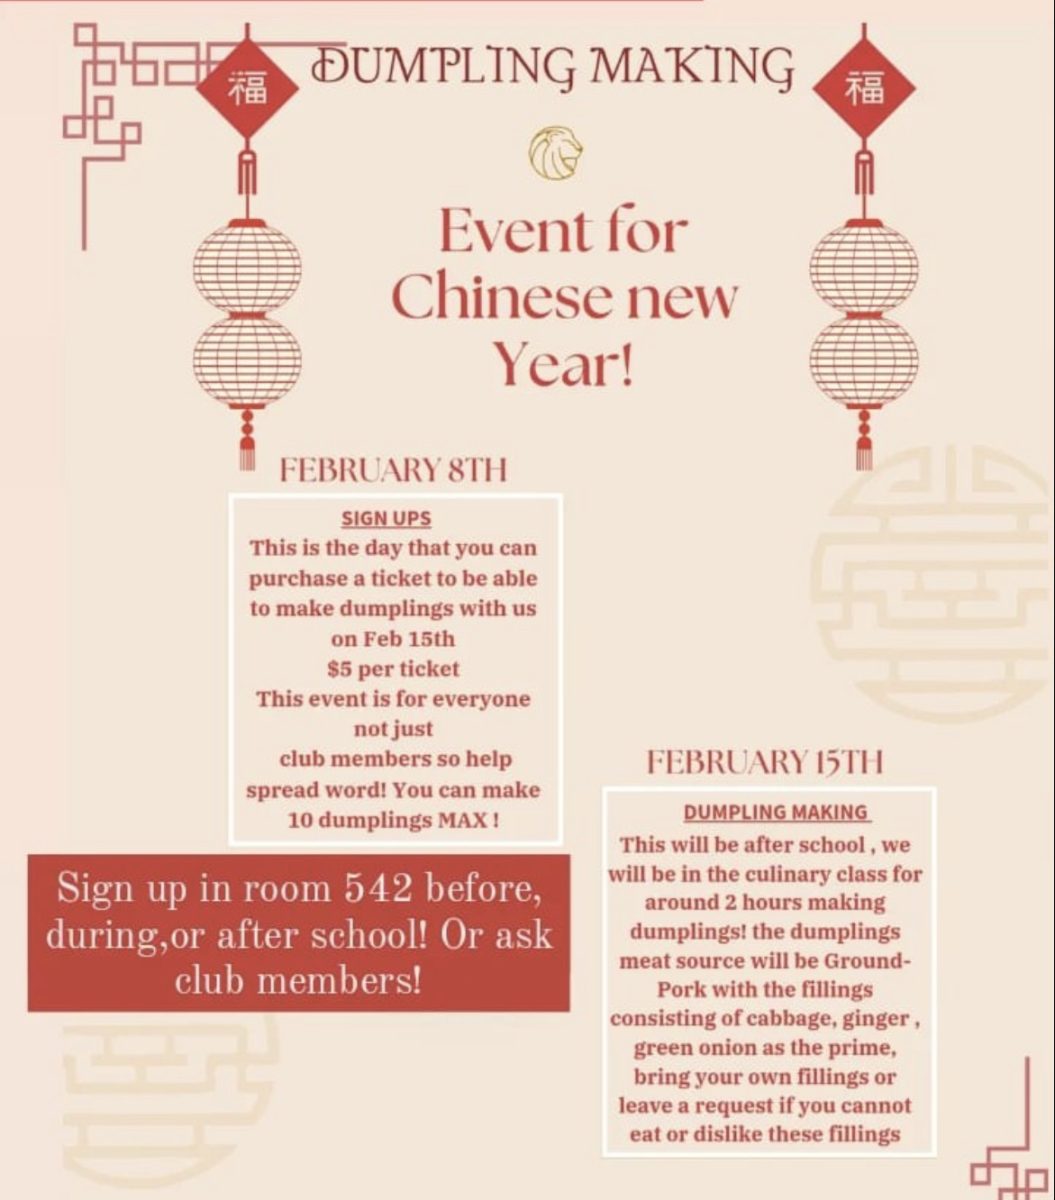 A+Dumpling+Making+event+being+organized+by+the+Chinese+Club+to+celebrate+Chinese+New+Year+will+happen+Feb.+15th+after+school+